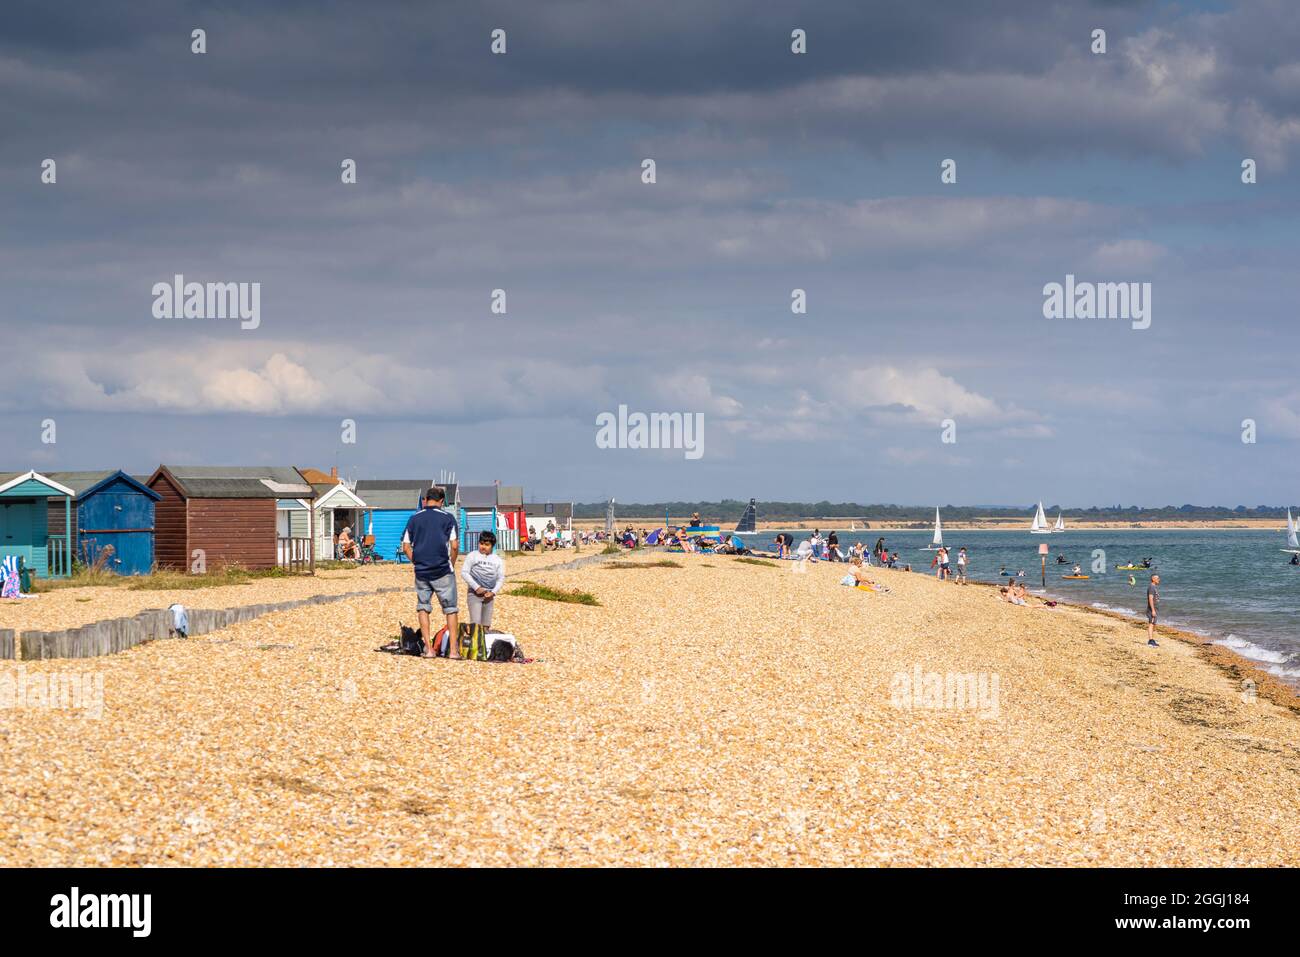 People on a busy day at Calshot Beach during summer, Calshot, Hampshire, England, UK Stock Photo